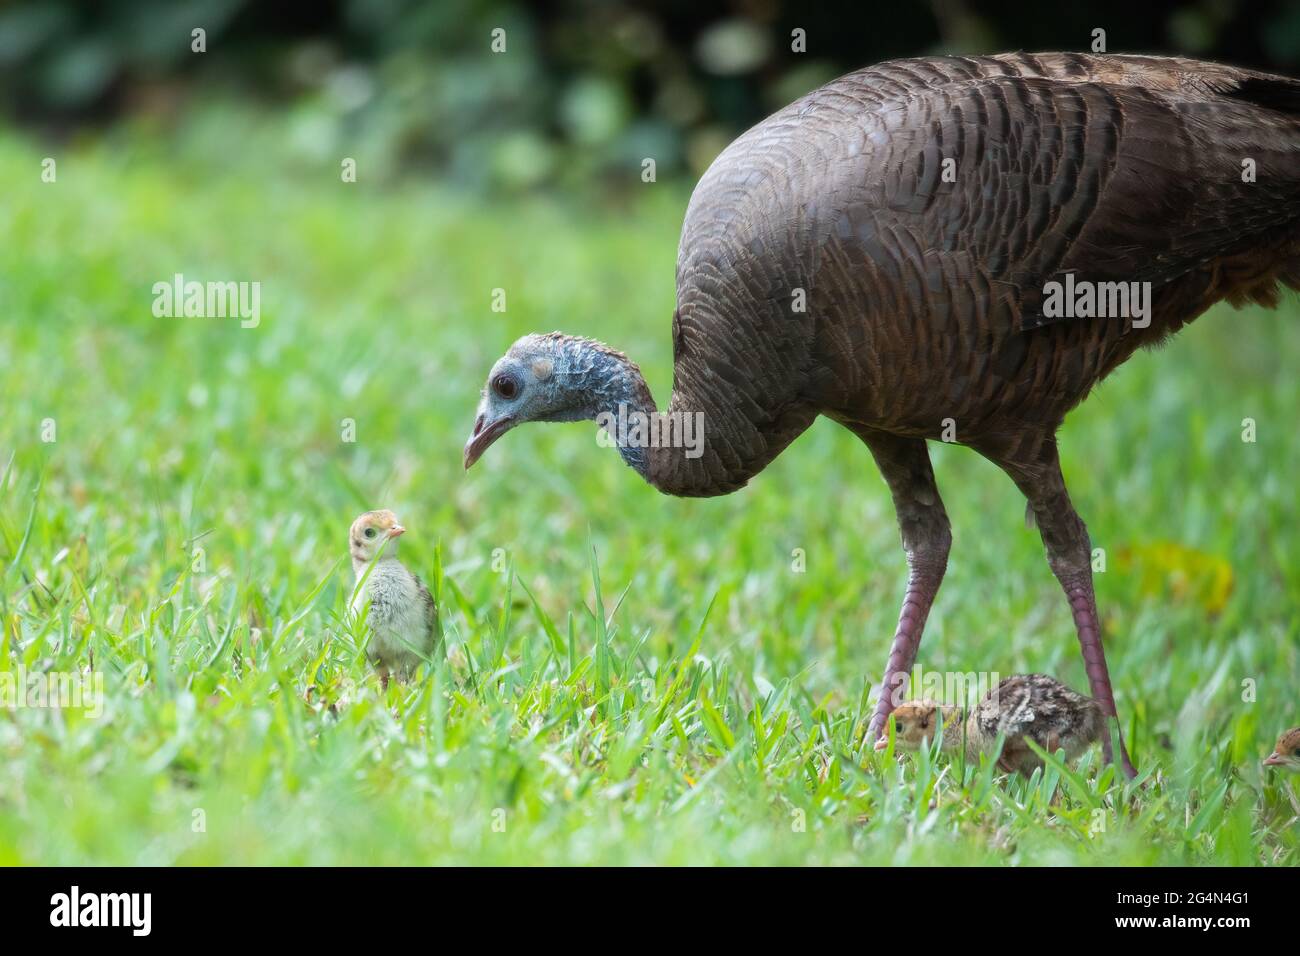 A female mother turkey (Meleagris gallopavo) with a few chicks walking through green grass. Stock Photo